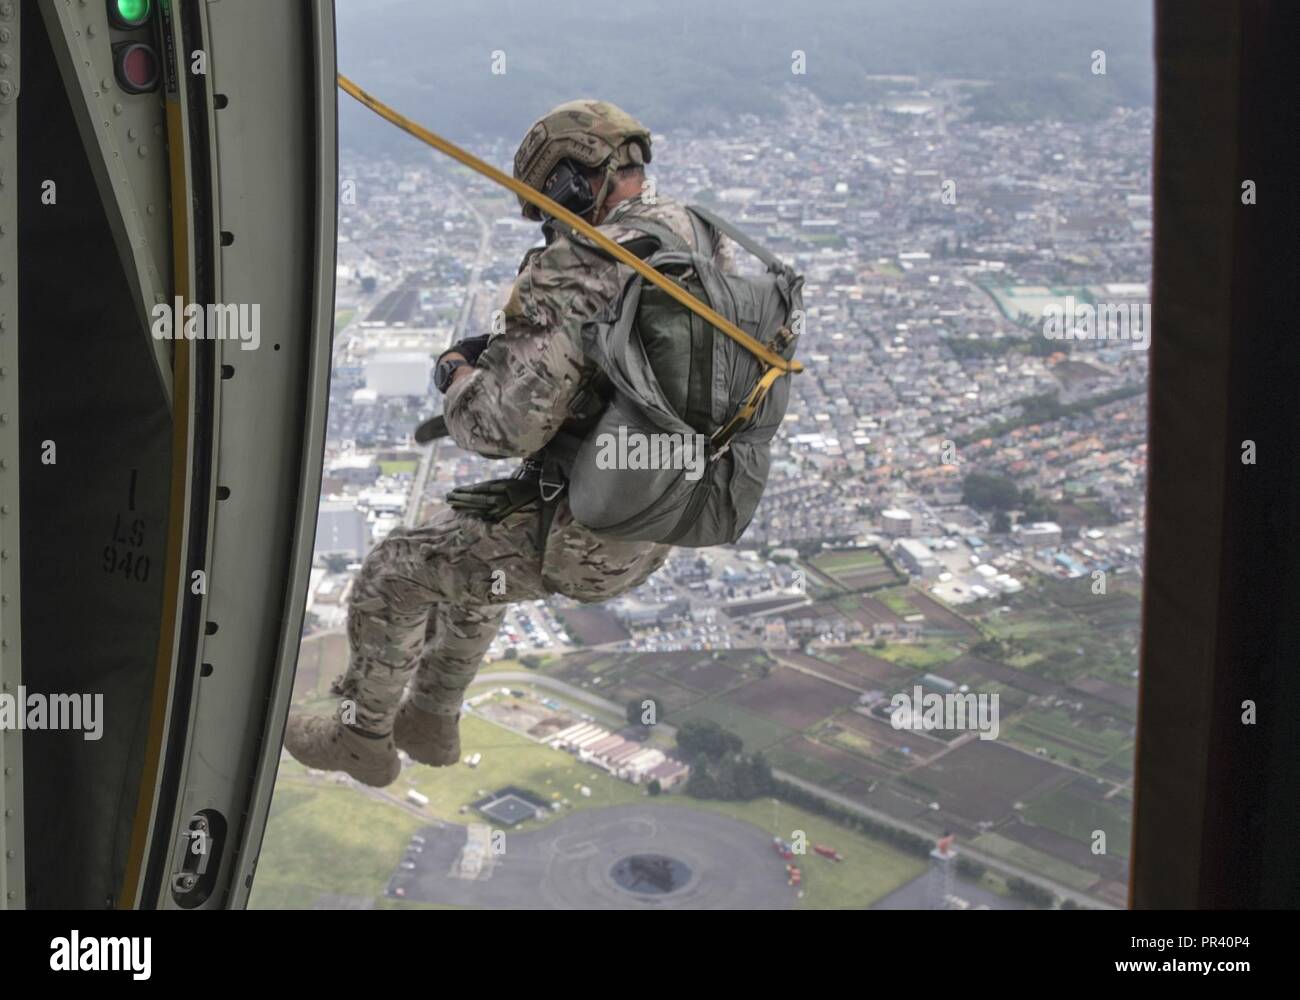 Tech. Sgt. Seth Sarrett, 374th Operations Support Squadron survival, evasion, resistance and escape specialist, jumps out of a C-130J Super Hercules during a training mission over Yokota Air Base, Japan, July 28, 2017. The training not only allowed the SERE to practice jumping, but it also allowed the Yokota aircrews to practice personnel drops and maintaining their qualifications. Stock Photo